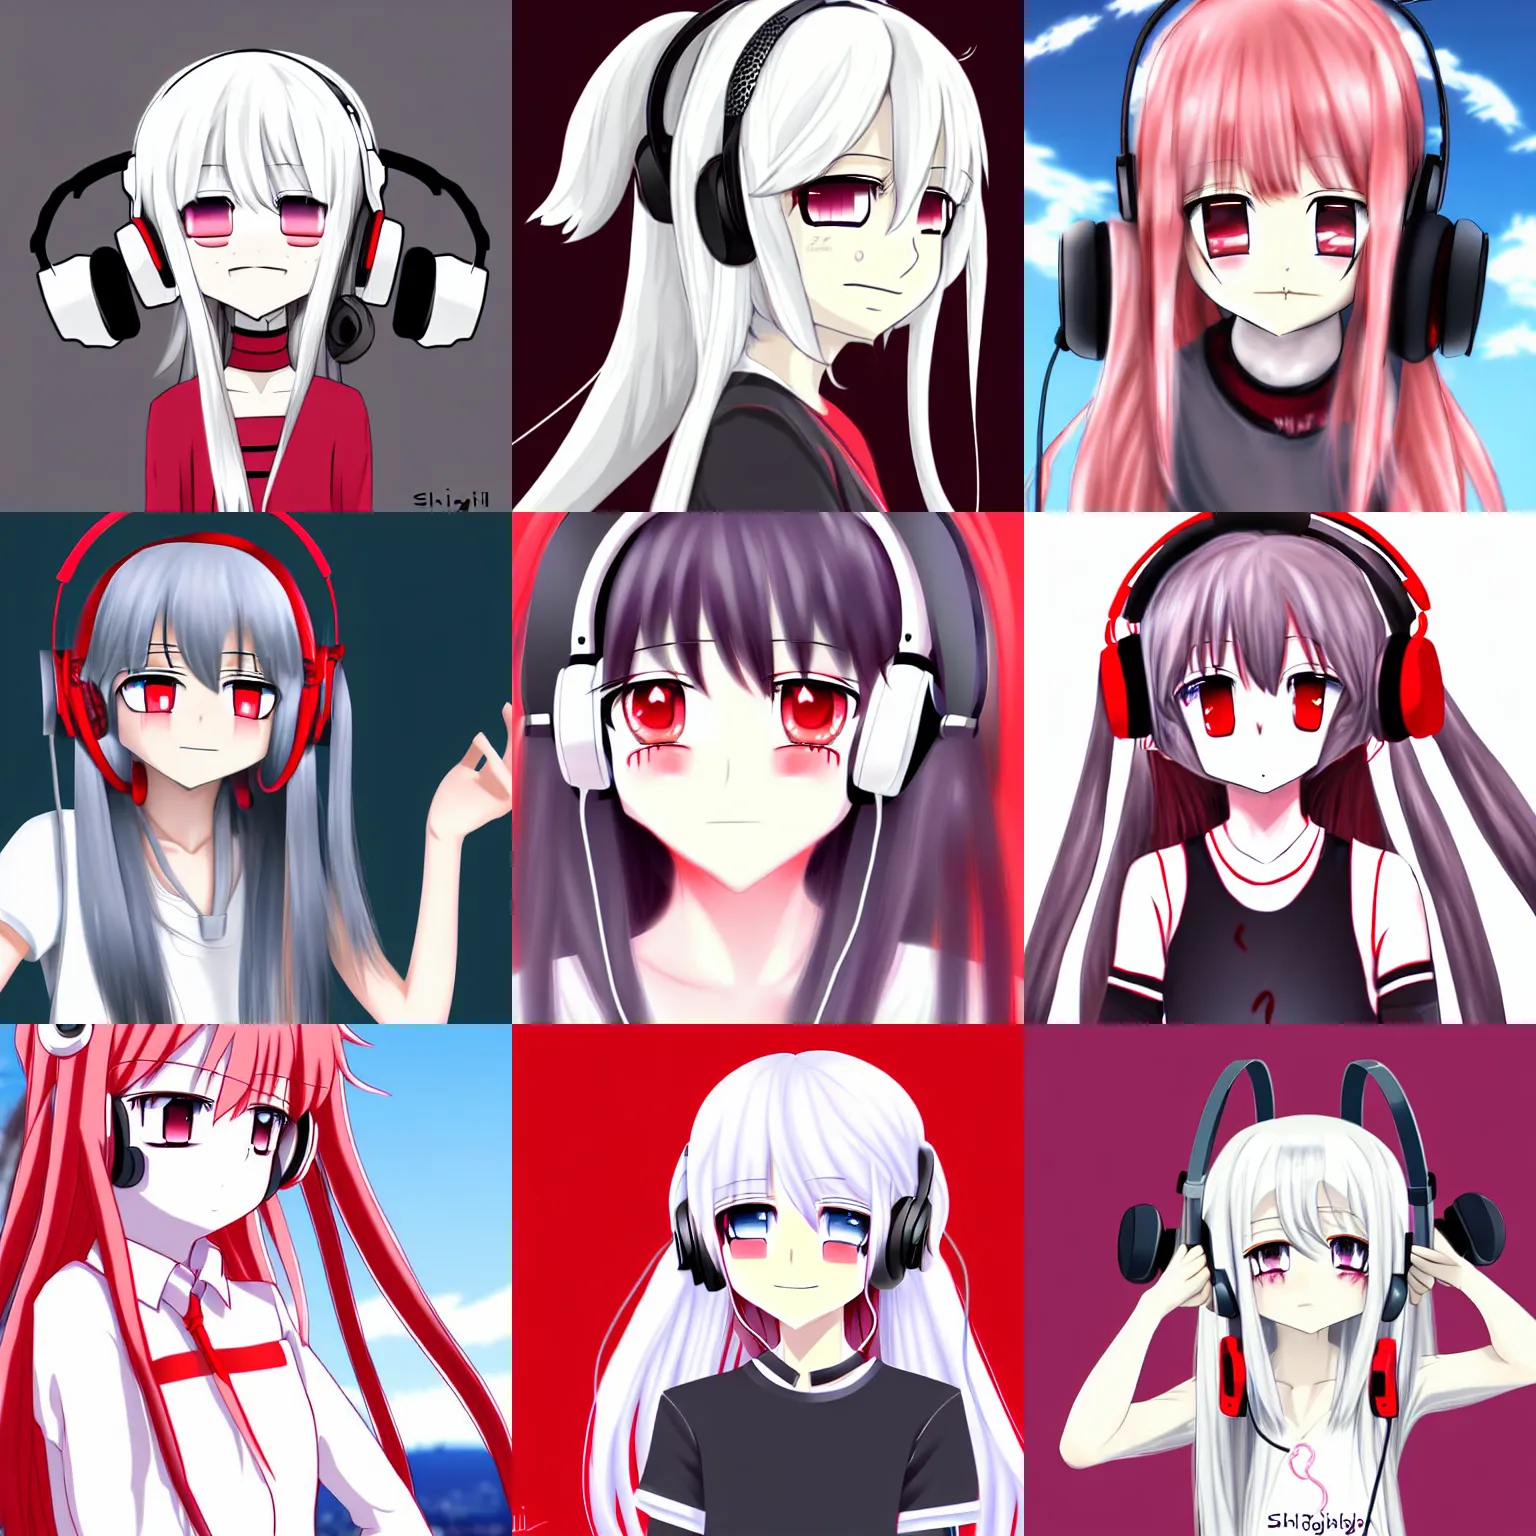 Prompt: white long haired red eyed young cute girl wearing headset by shirabii in anime style